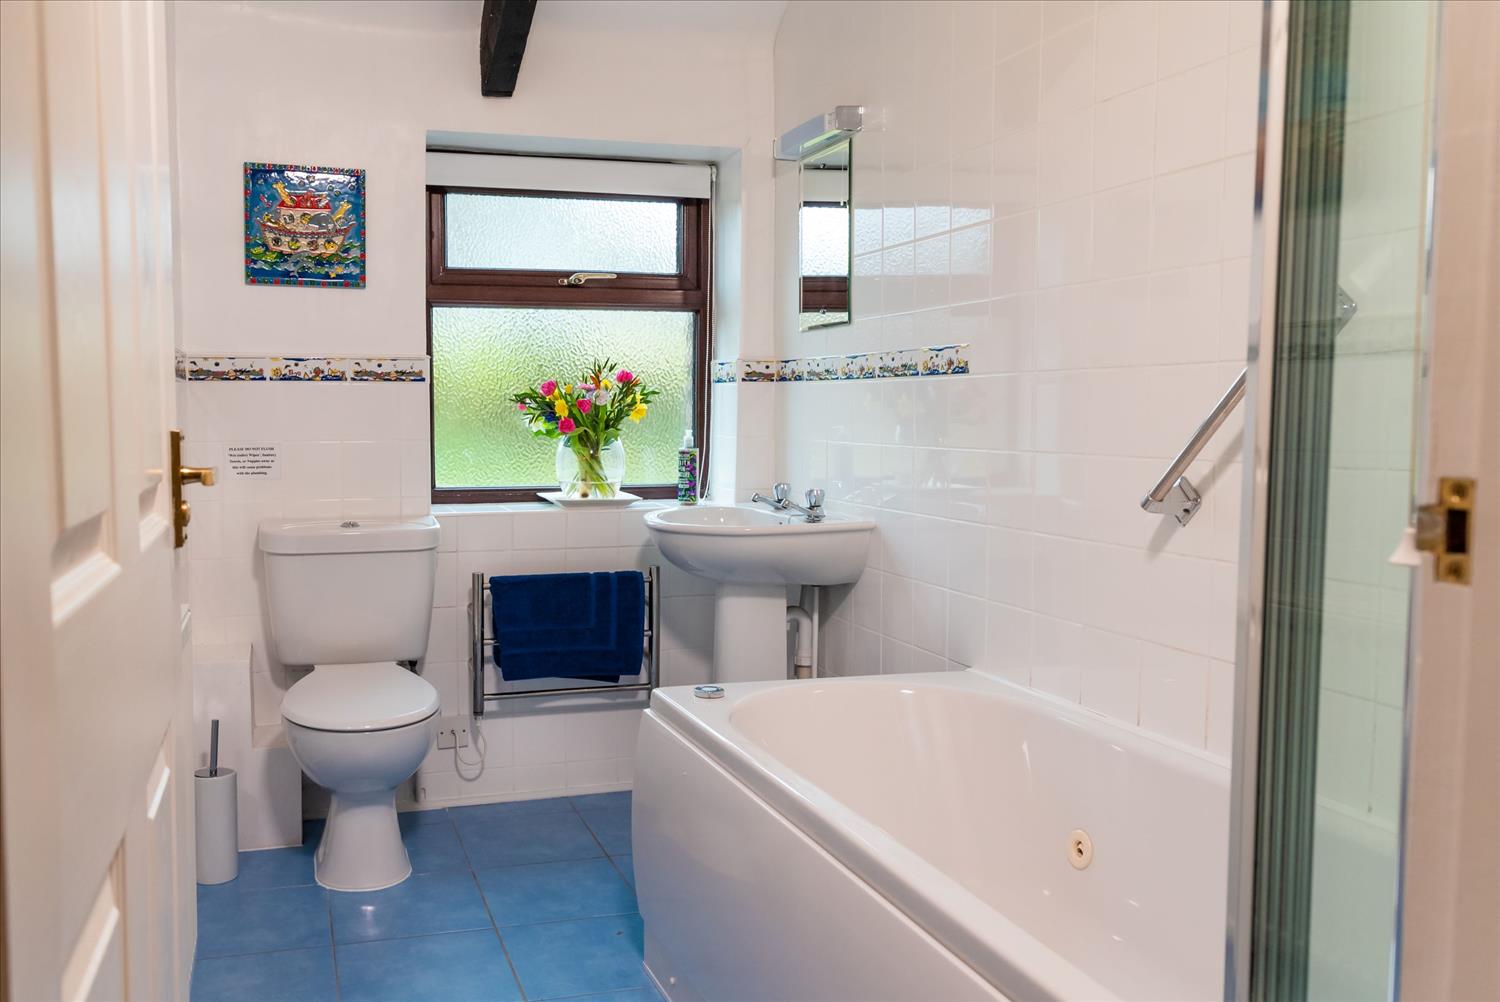 The bathroom at Polrunny Farm's Blackberry Cottage, with Whirlpool bath and flowers in the window and brightly coloured art on the wall.